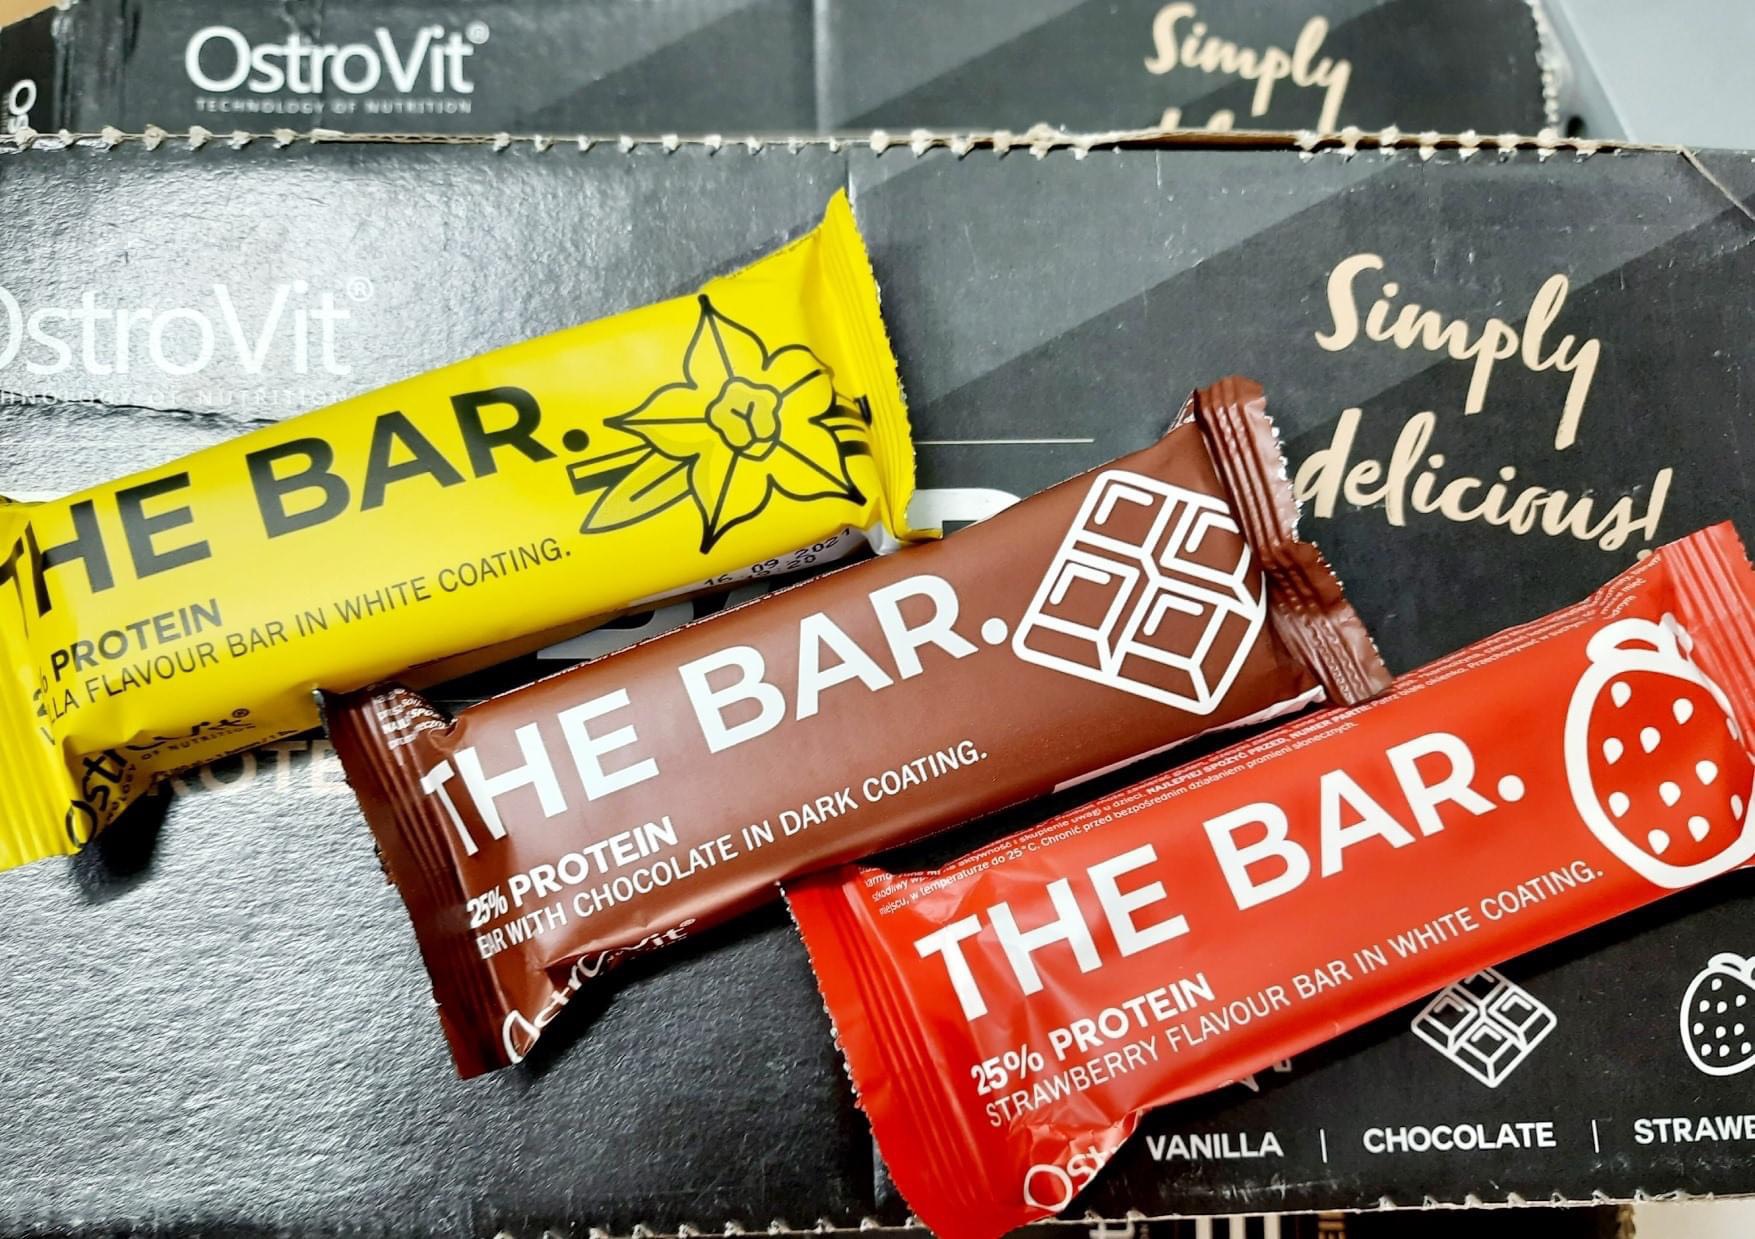 review-danh-gia-ostrovit-protein-bar-gymstore-2